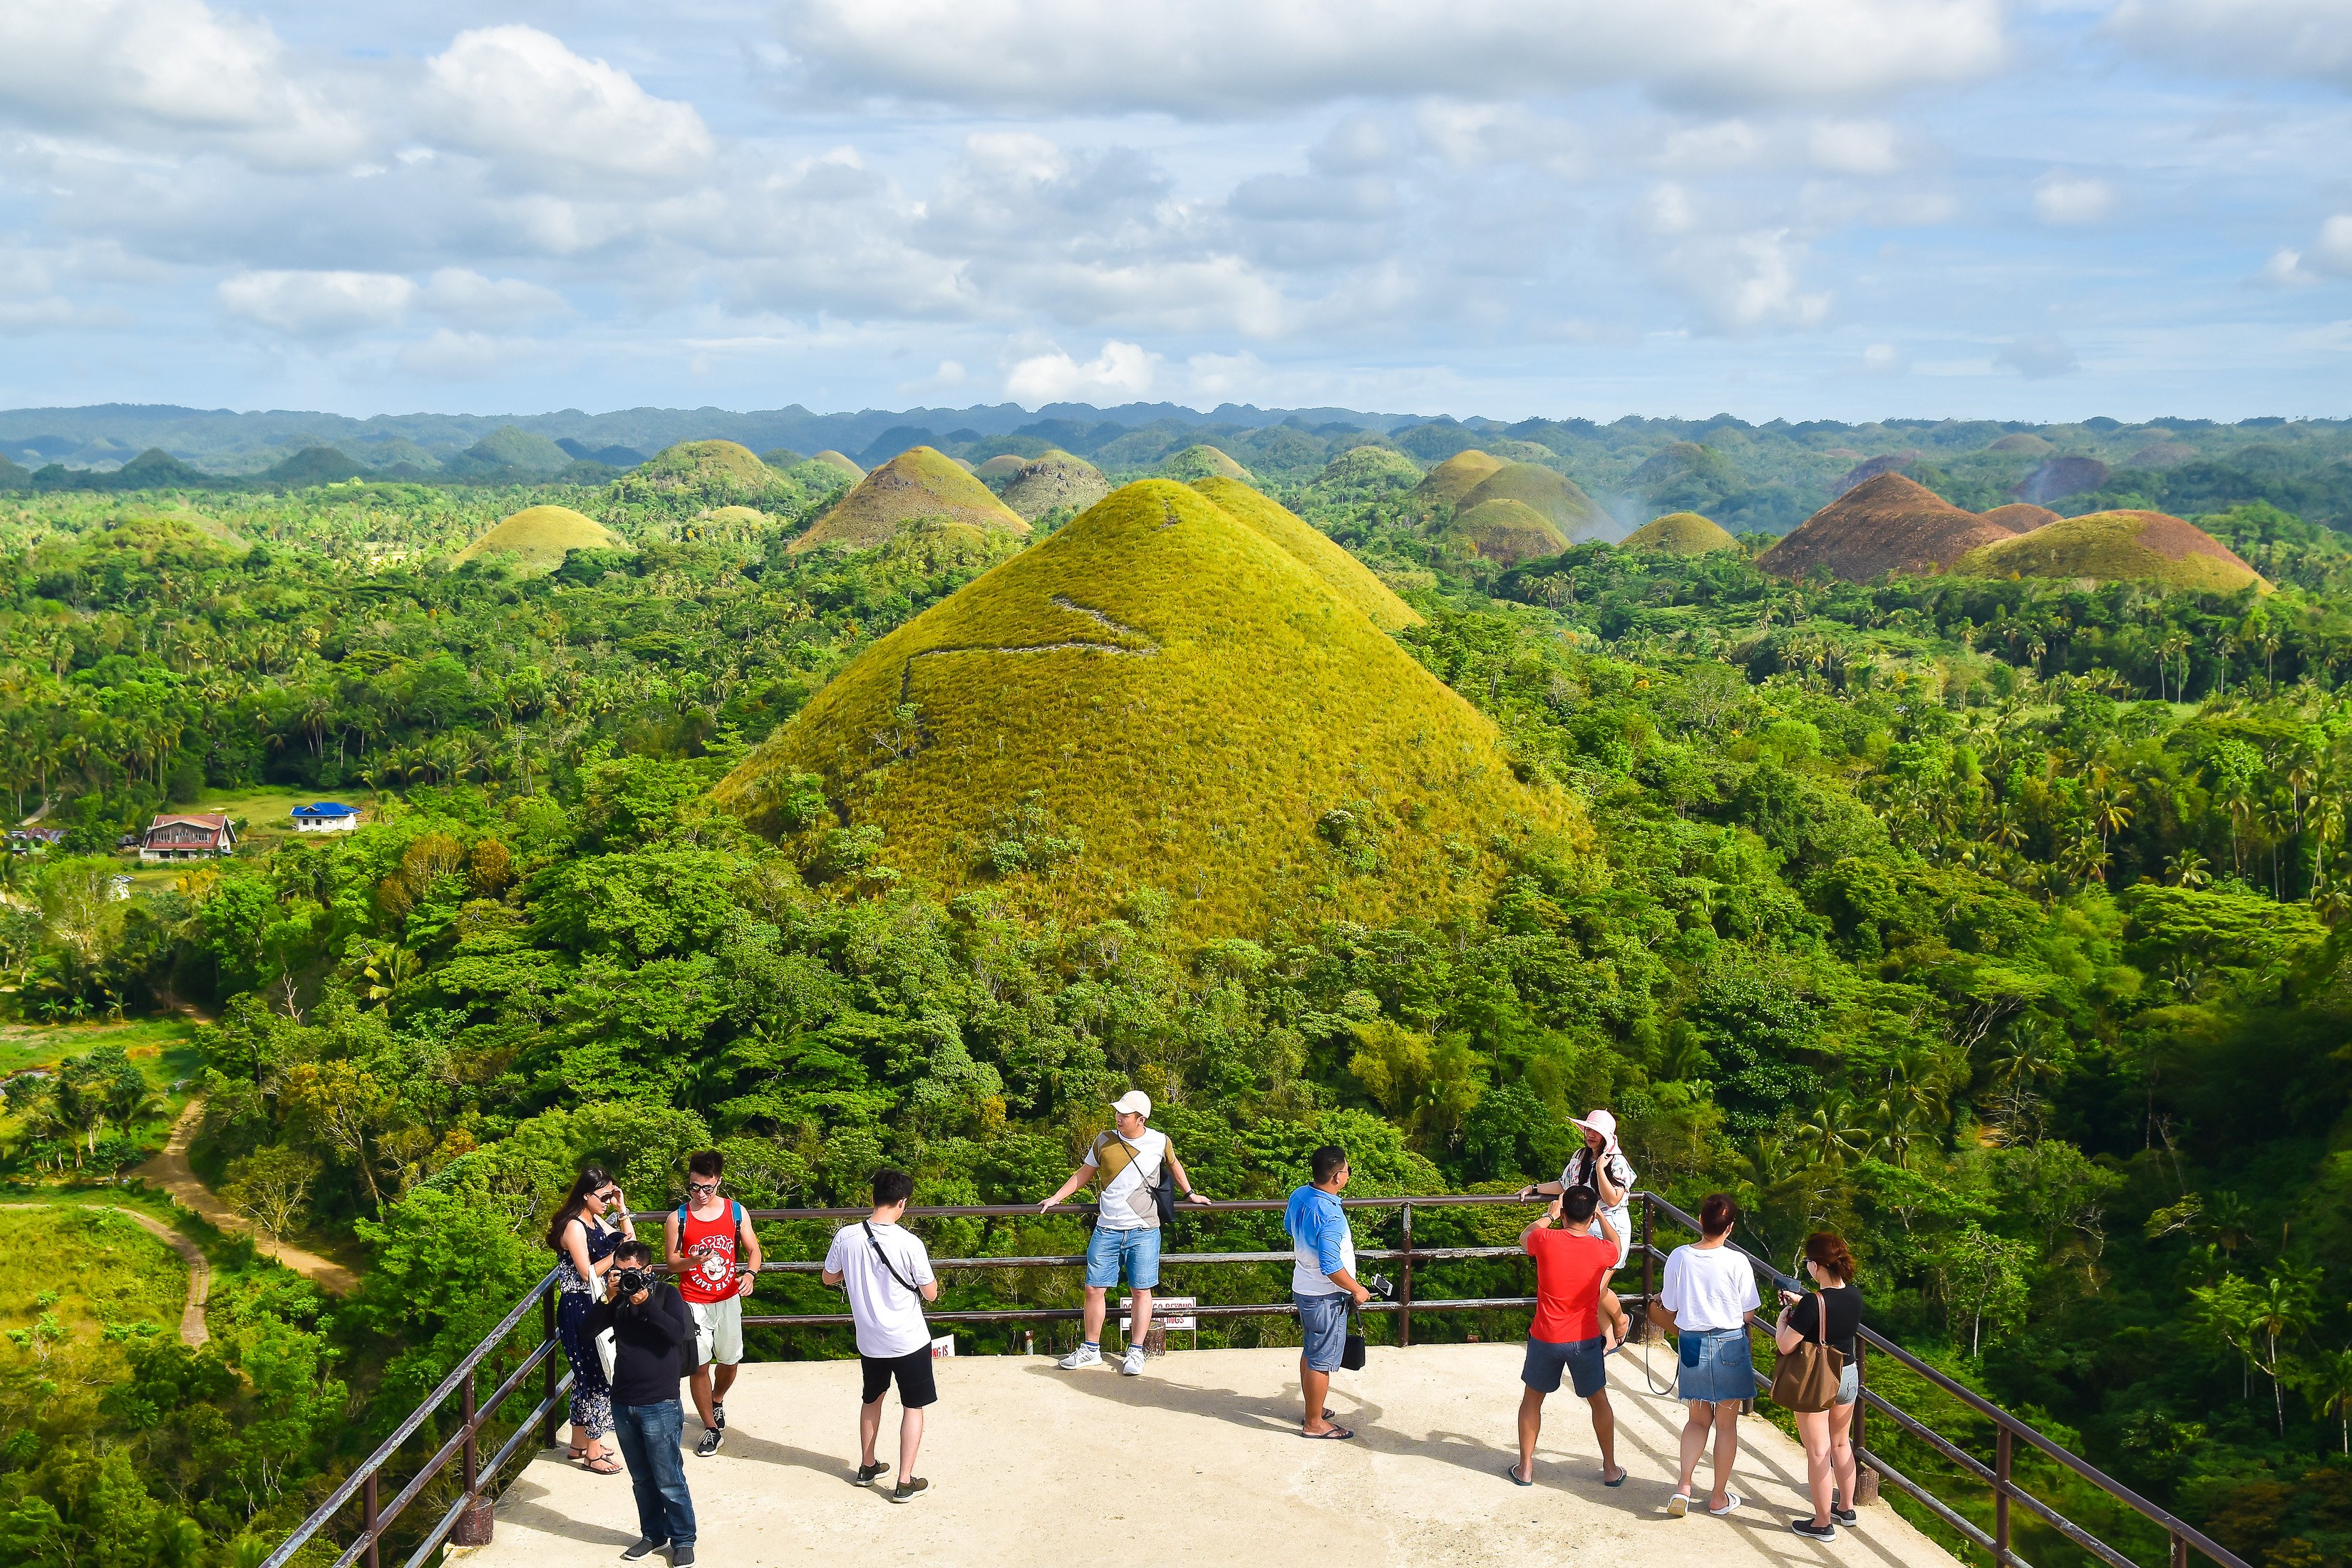 Chocolate Hills. Unesco last year declared the entire island of Bohol as the Philippines’ first Unesco Global Geopark for its “unique geological treasures” found in Chocolate Hills. Photo: Shutterstock